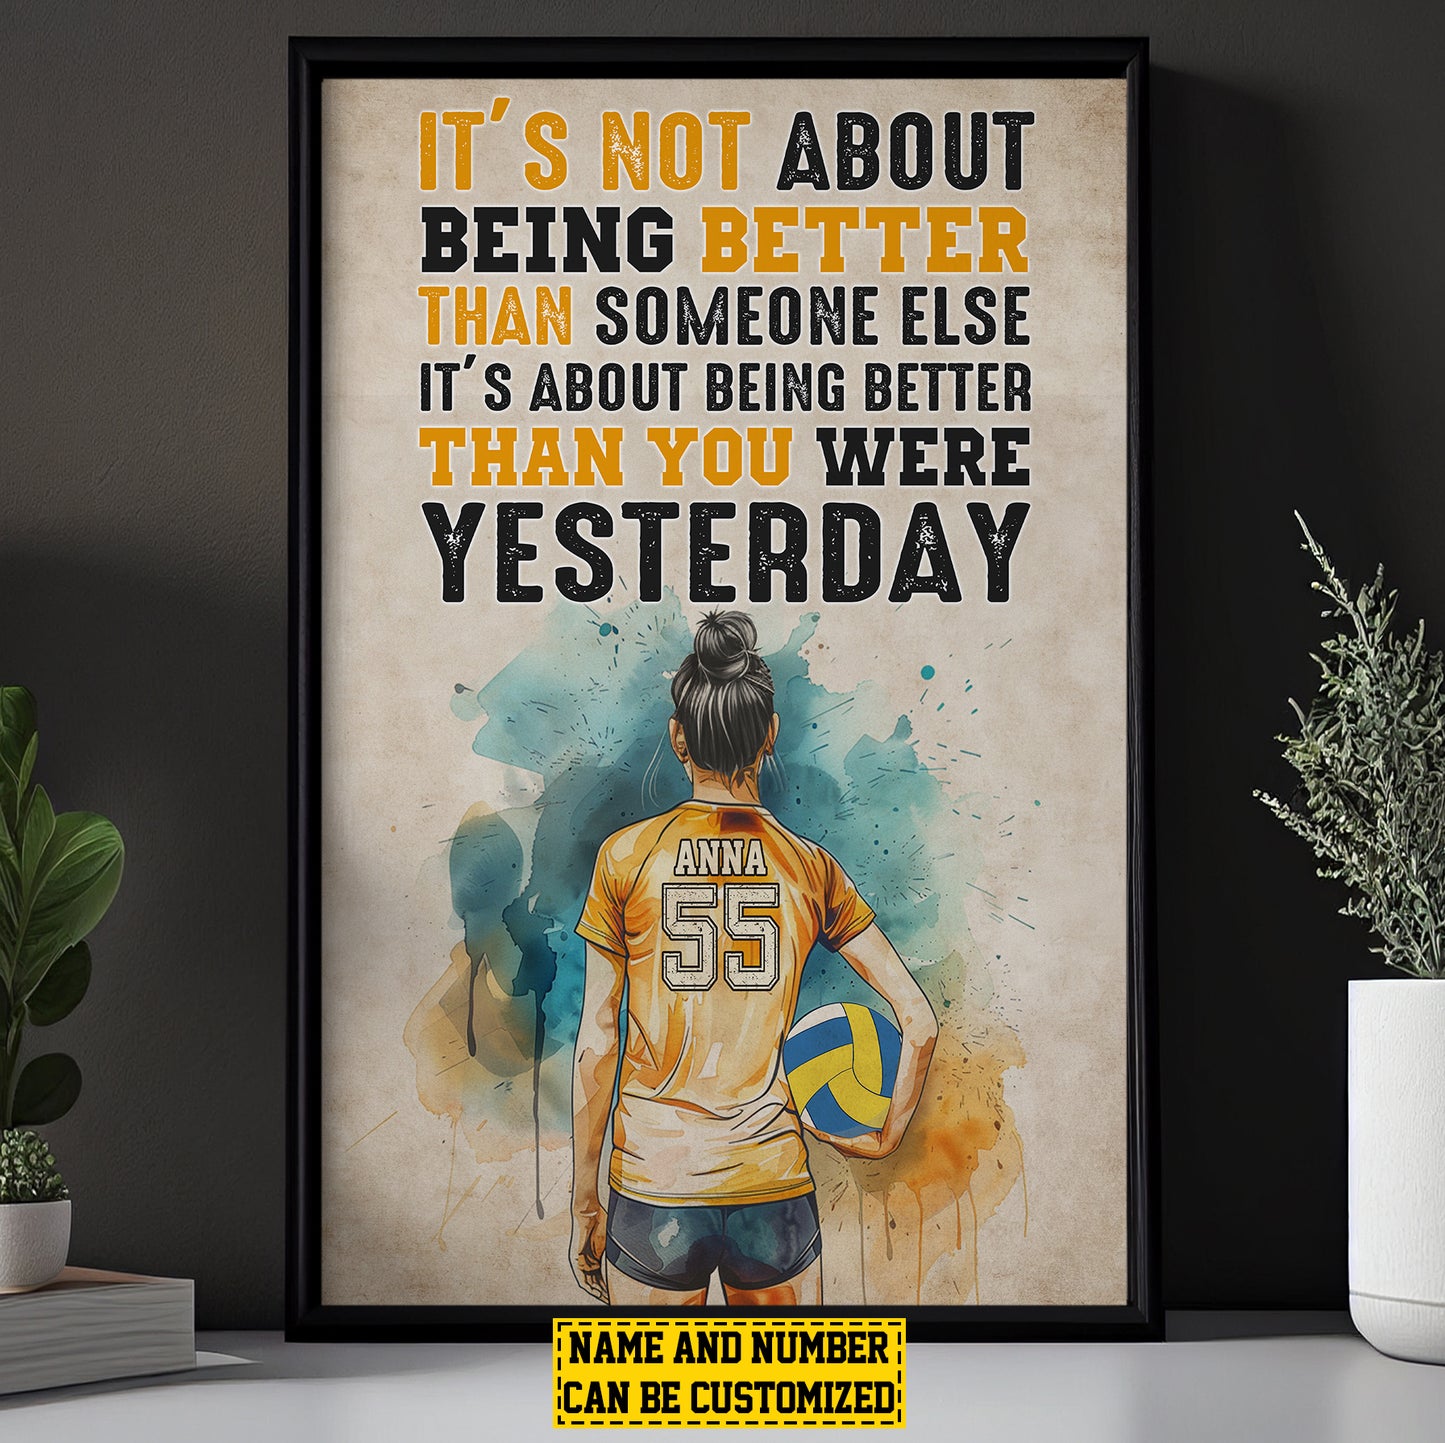 It's Not About Being Better Than Someone Else, Personalized Motivational Softball Canvas Painting, Inspirational Quotes Wall Art Decor, Gift For Softball Lovers, Softball Players